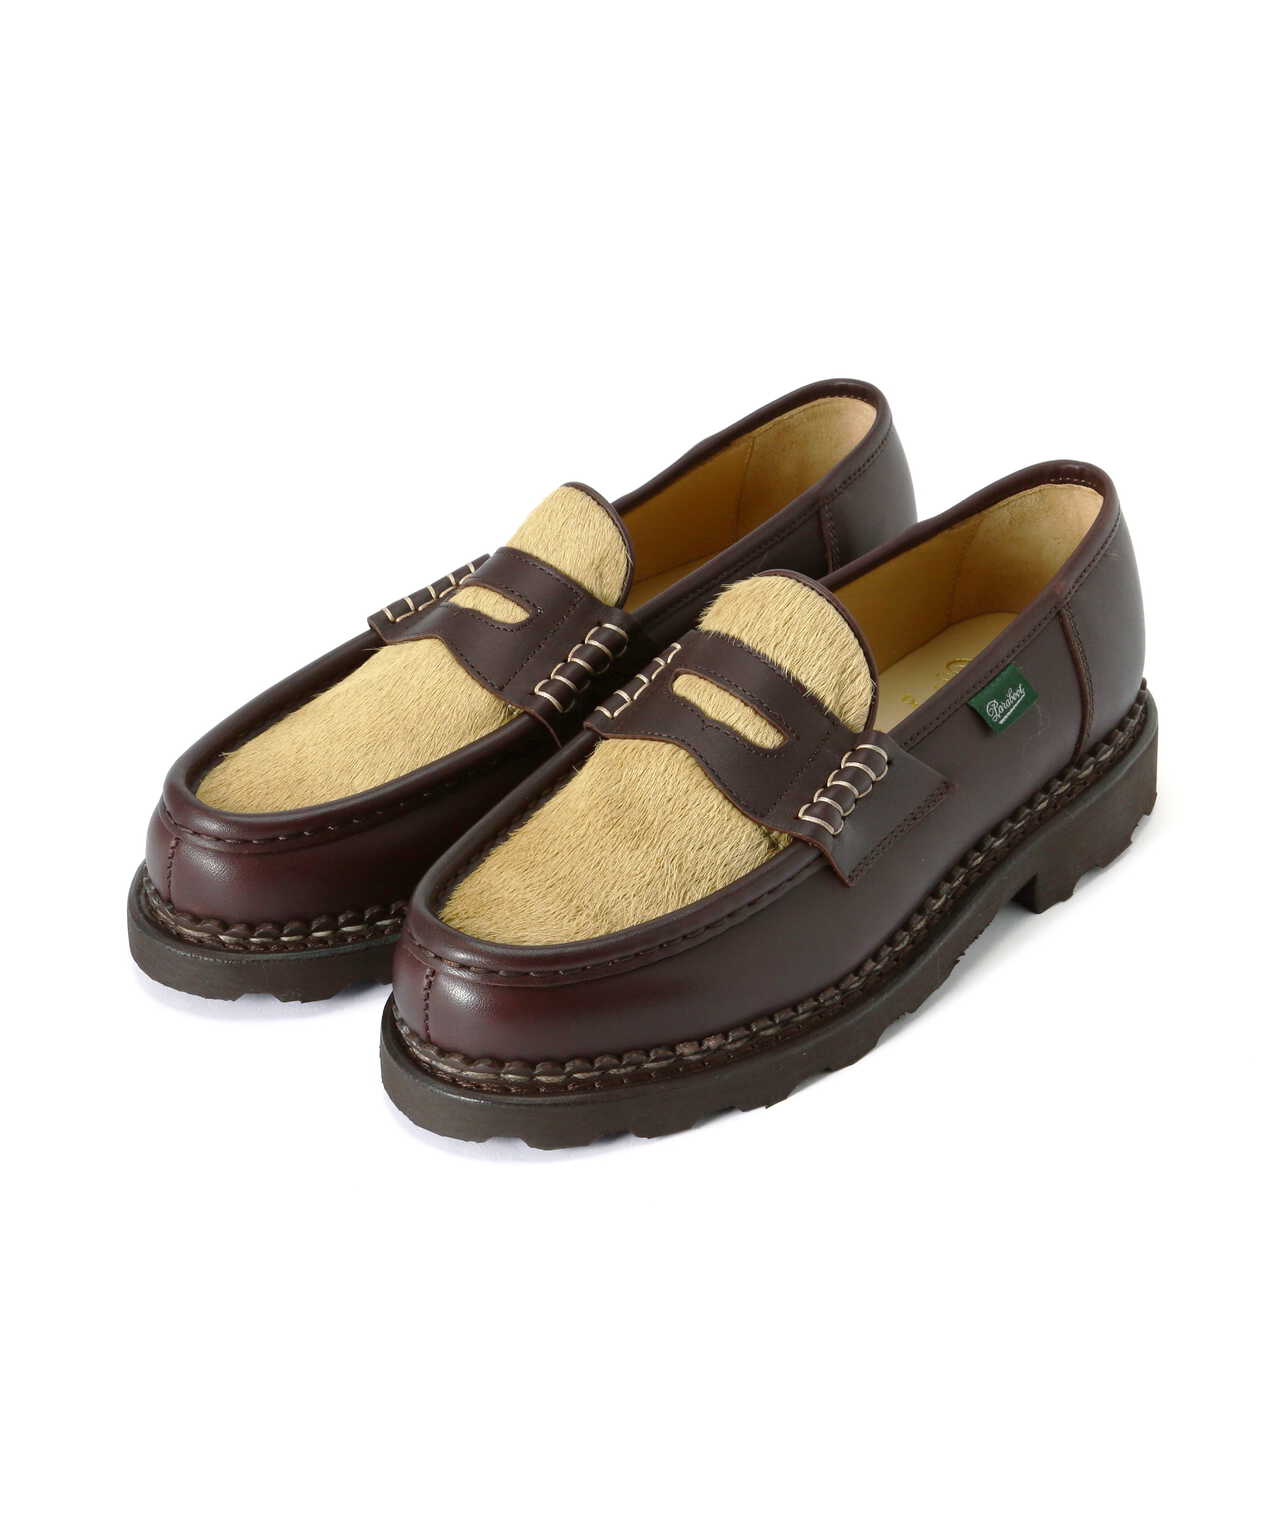 DROLE DE MONSIEUR X PARABOOT LOAFER(アウトレット商品・箱に傷あり)